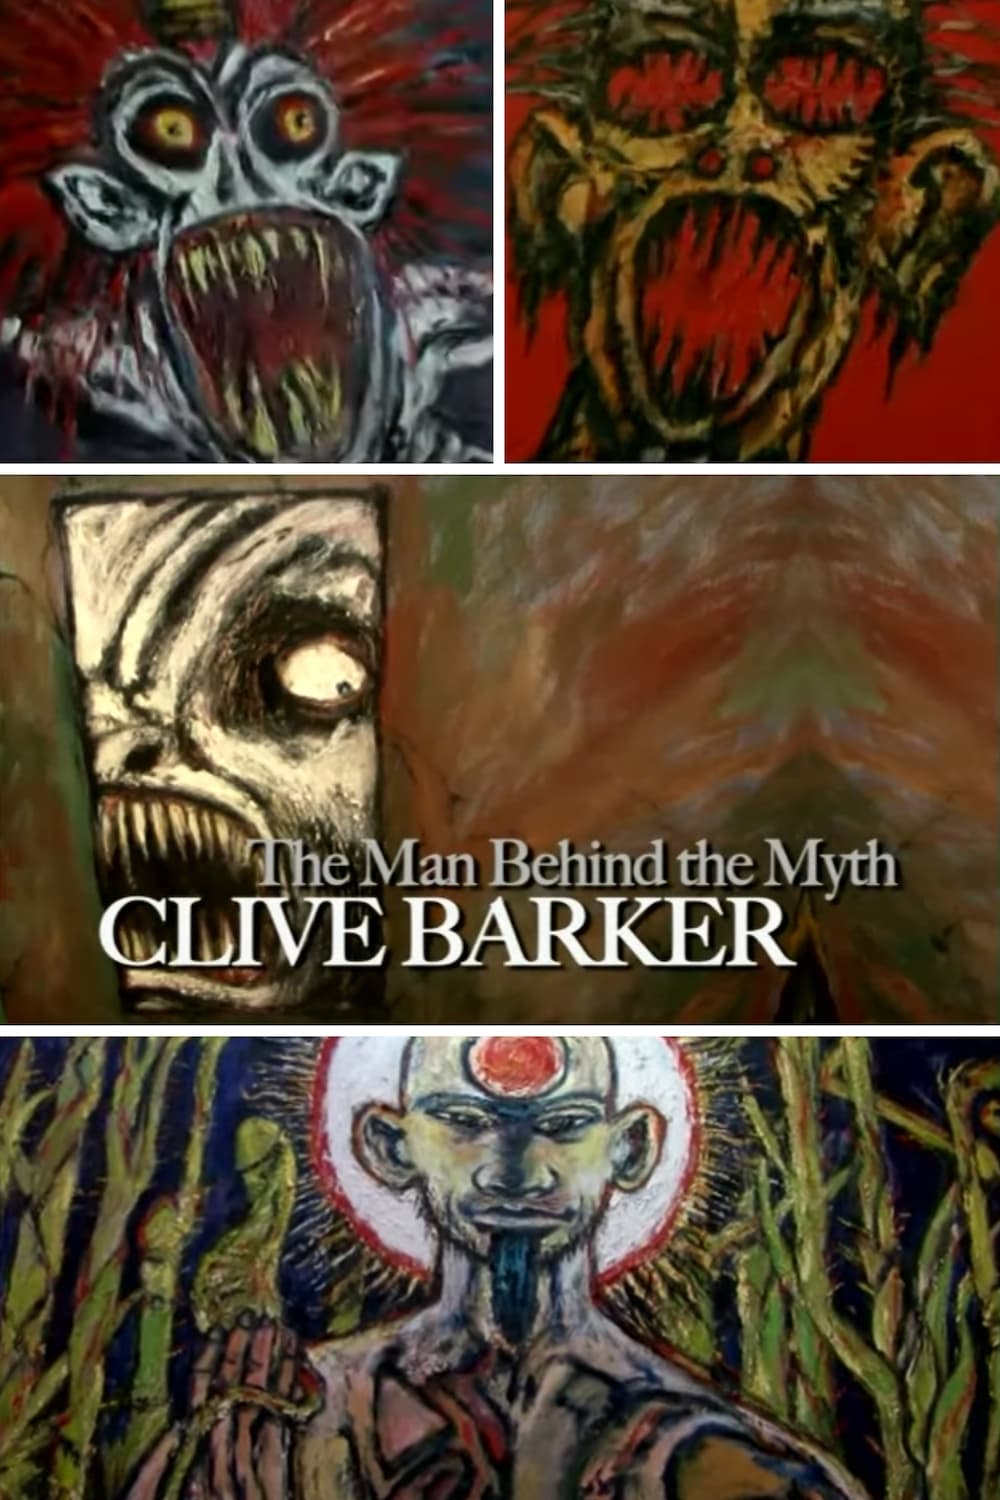 Clive Barker: The Man Behind the Myth